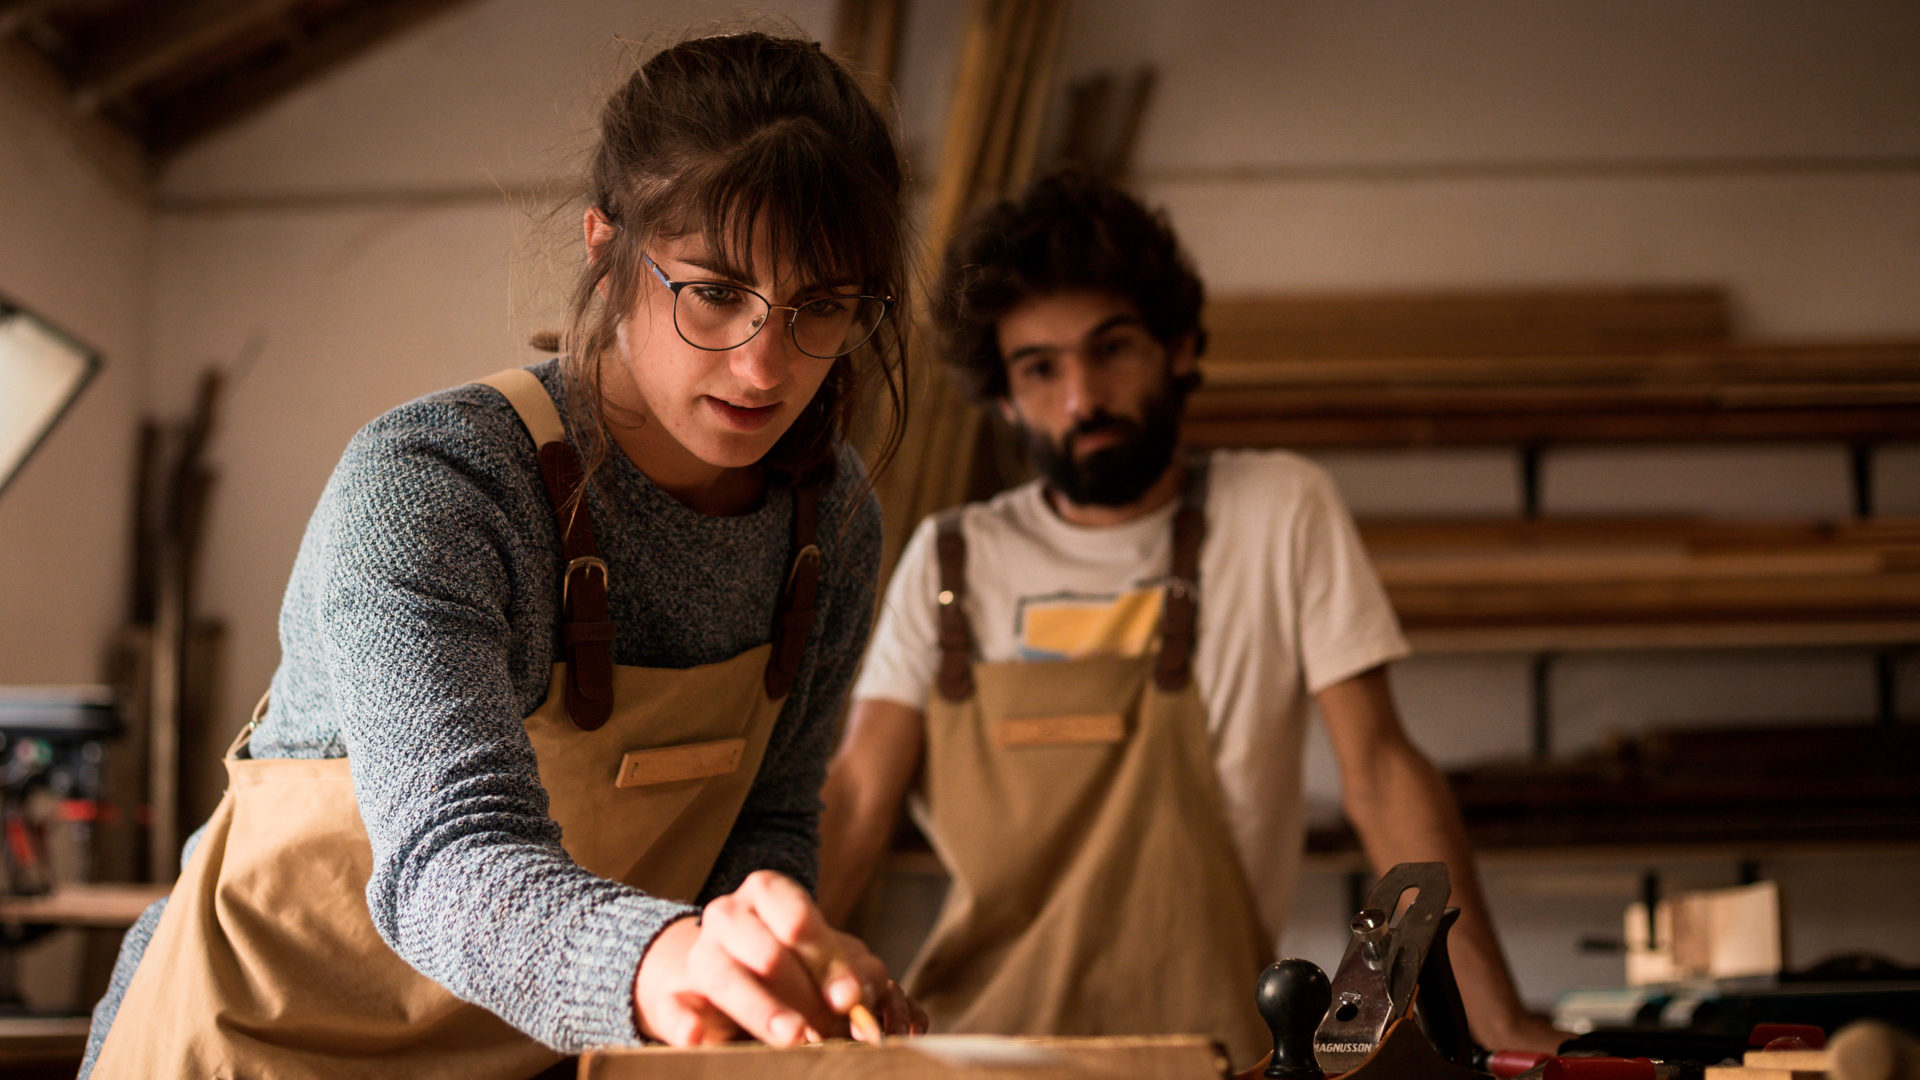 A young brown-haired woman with glasses is examining a piece of wood in a woodworking class. In the background, a young bearded man is looking at her.